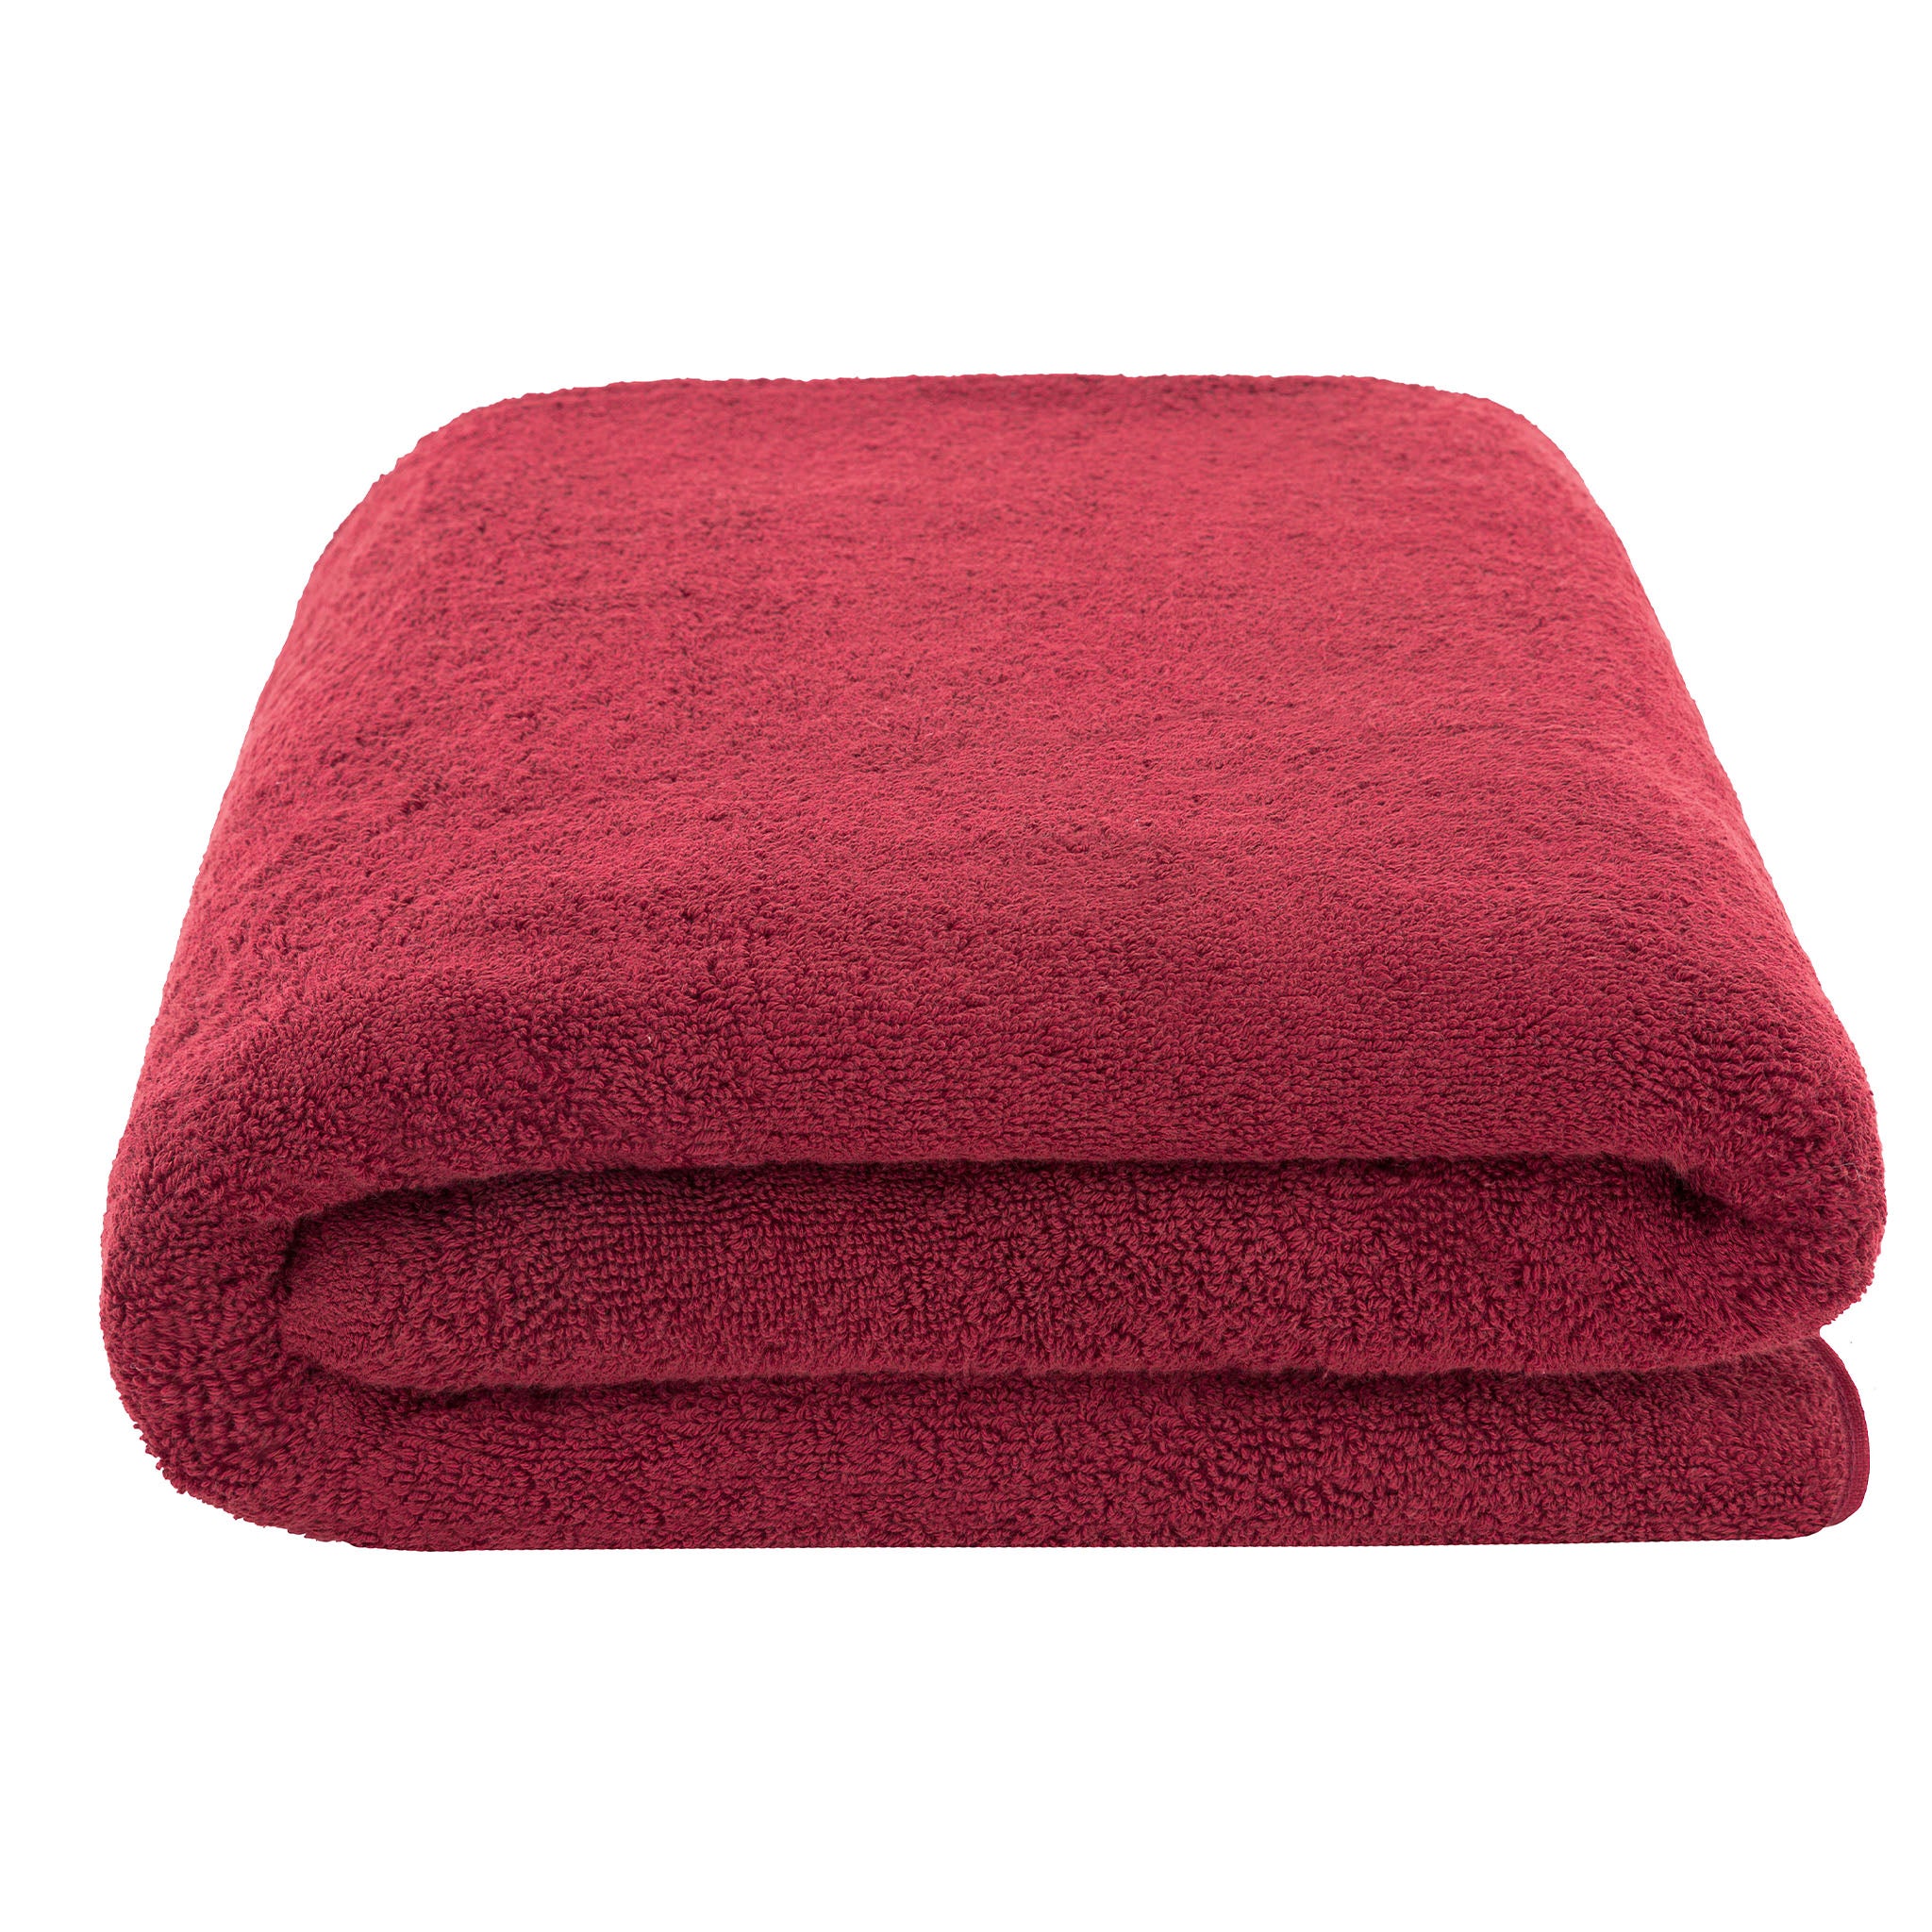 American Soft Linen 100% Ring Spun Cotton 40x80 Inches Oversized Bath Sheets bordeaux-red-3